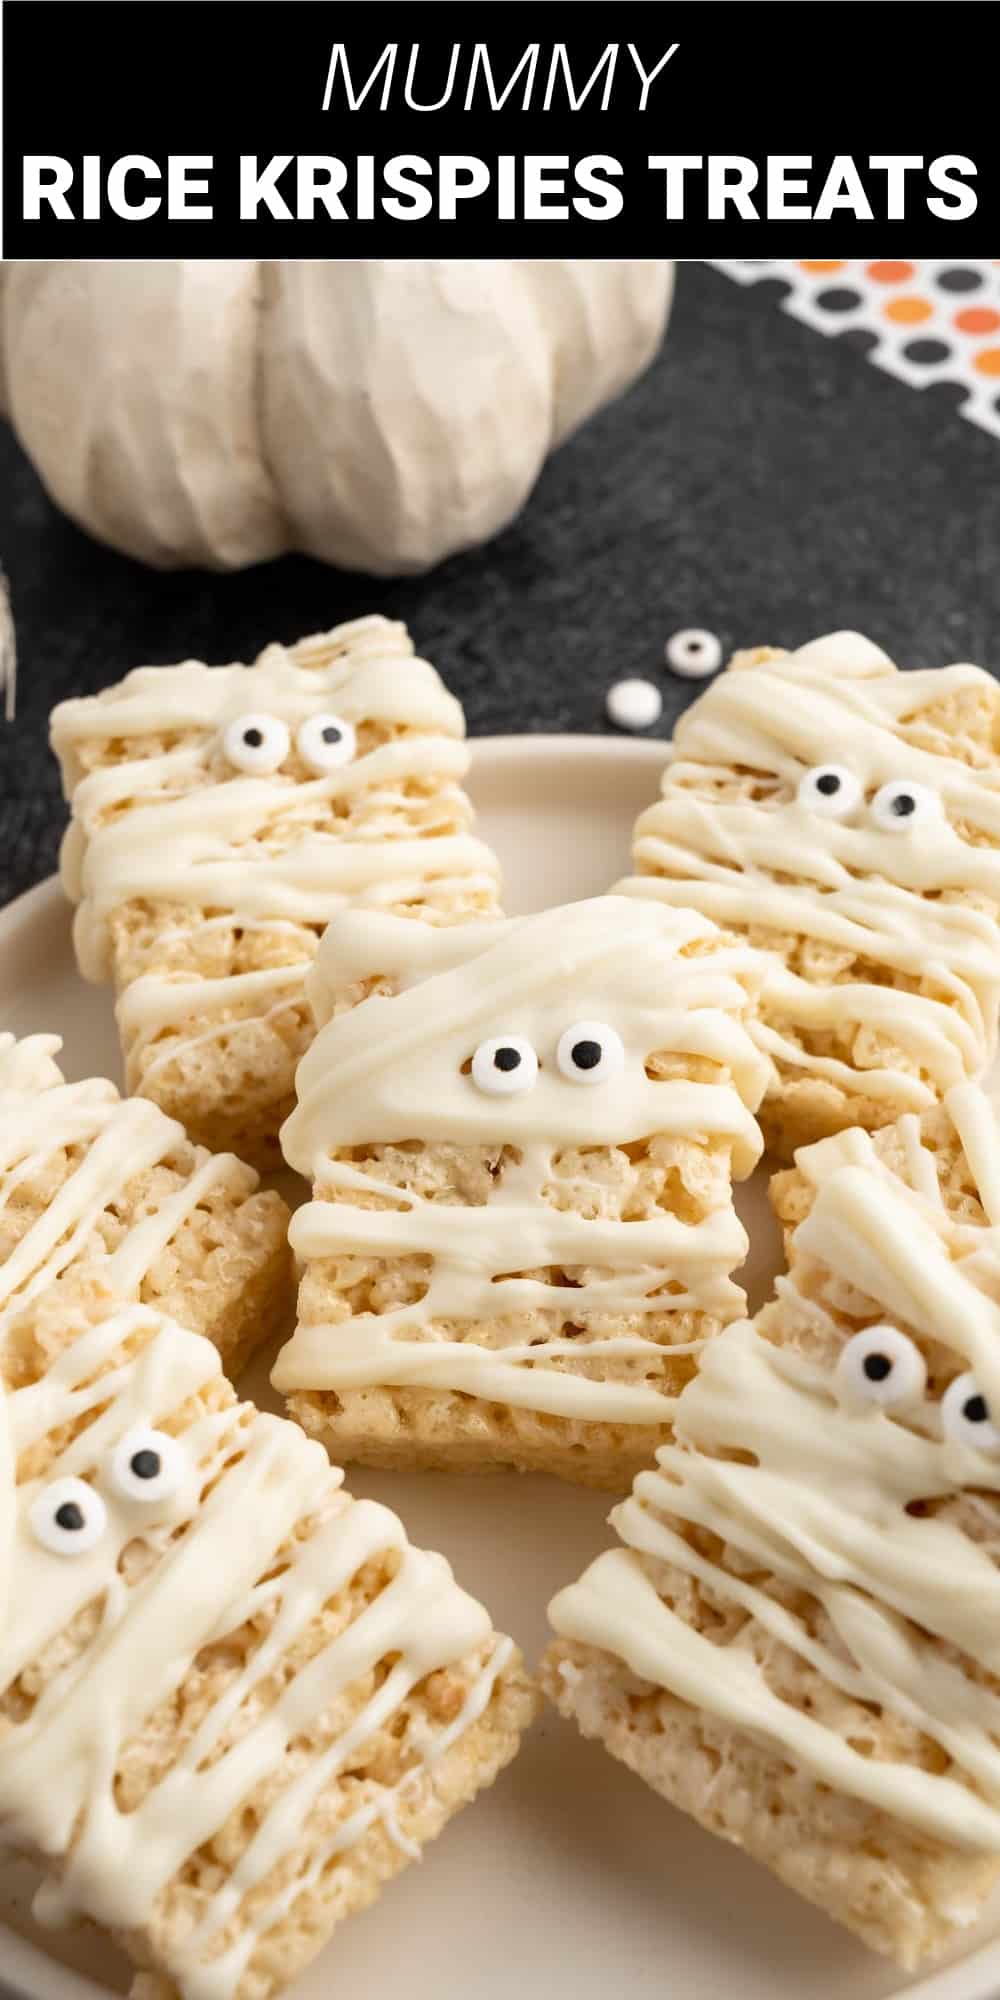 These mummy Krispies treats are an adorable and fun addition to any Halloween party or school event. Chewy and delicious Rice Krispies treats are decorated with creamy white chocolate drizzle and candy eyeballs to turn them into cute and spooky mummy treats that are also super quick and easy.